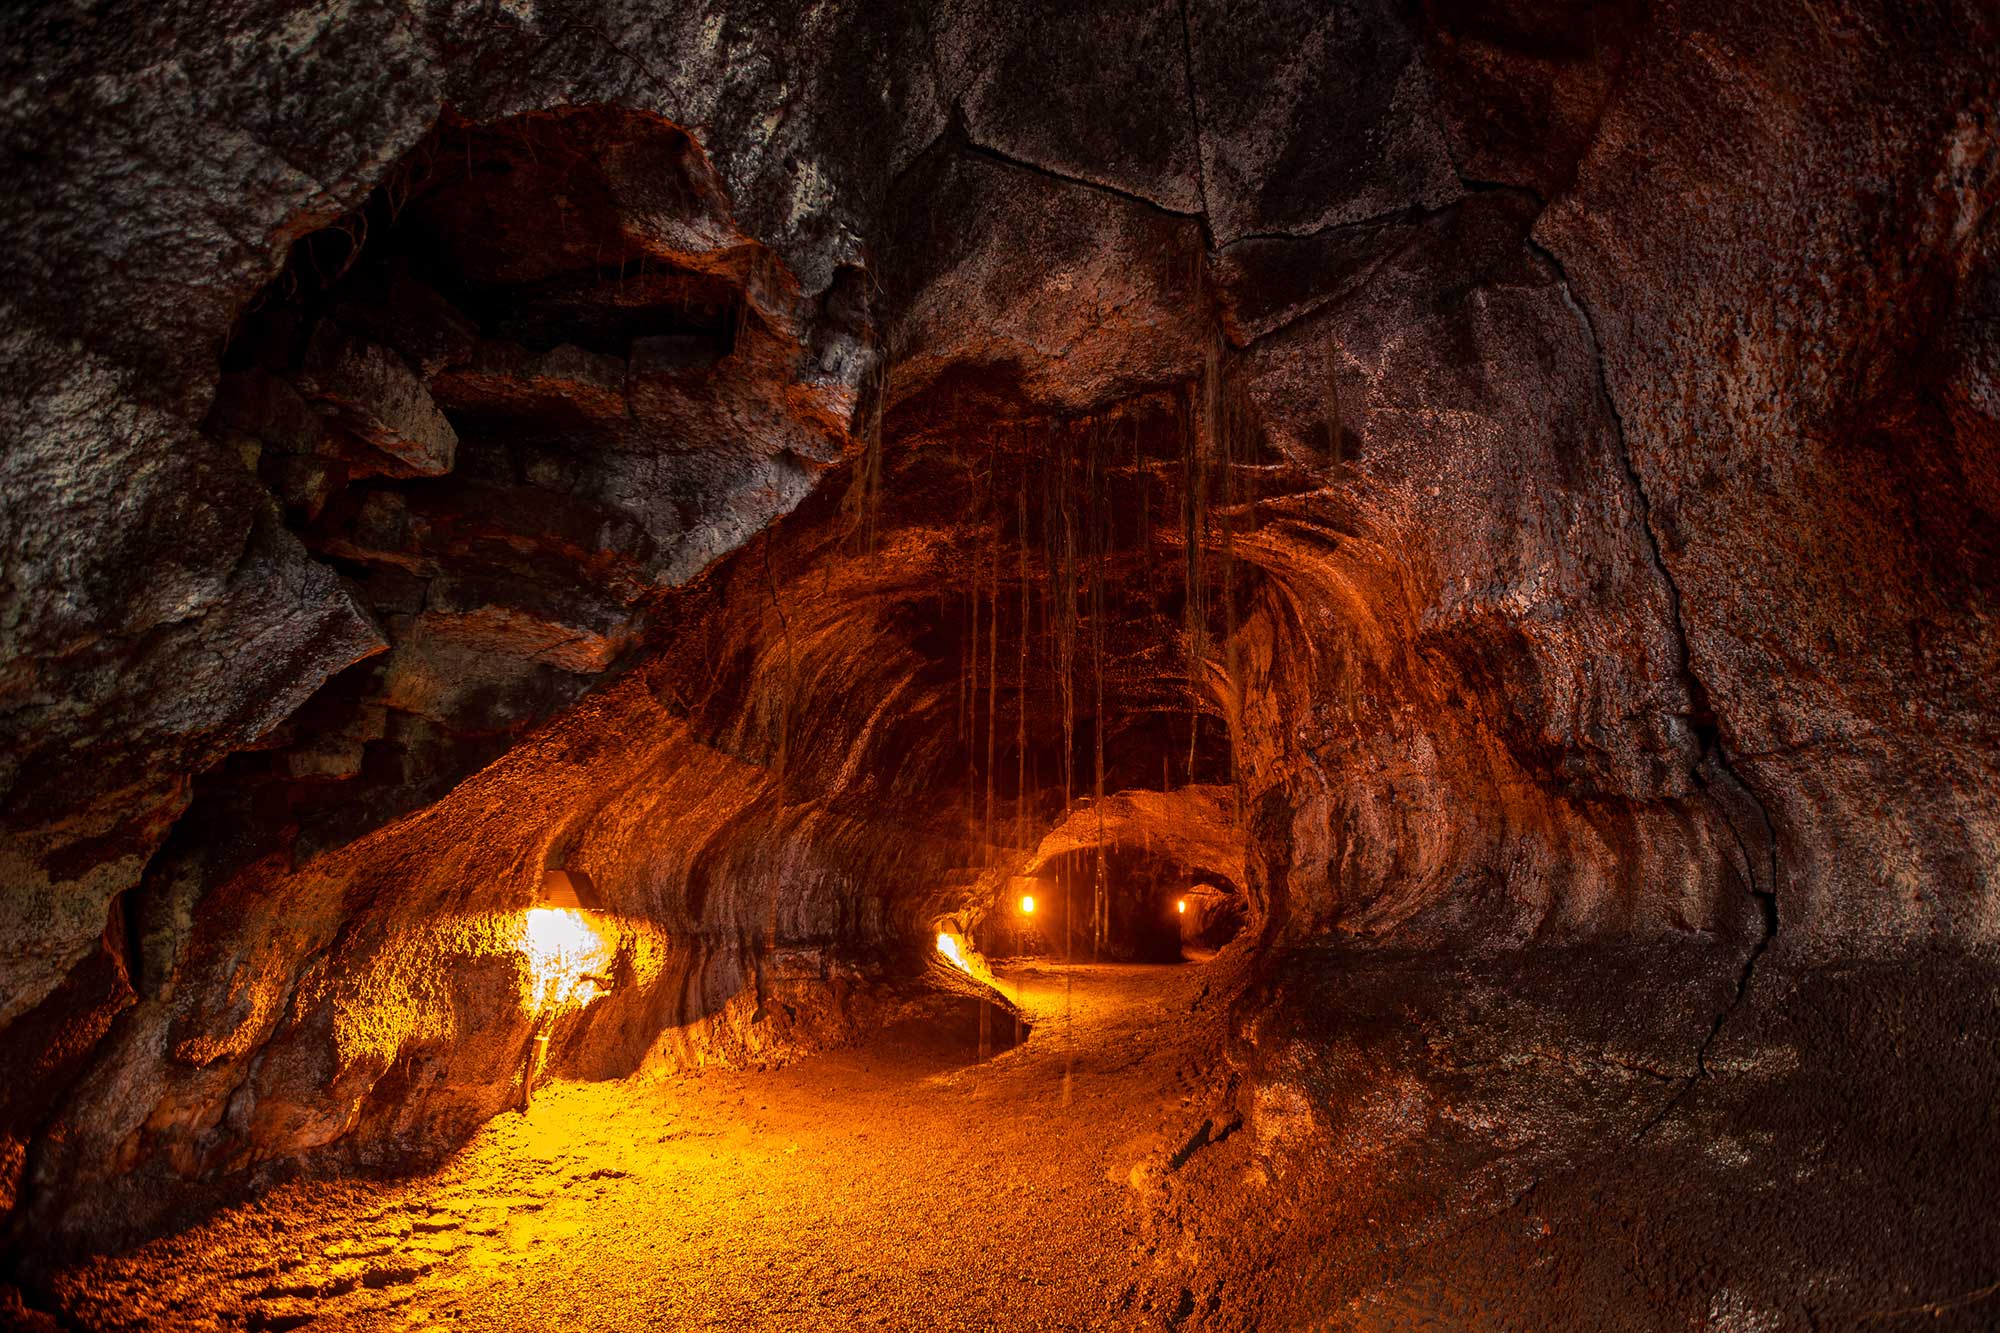 Photograph of the inside of Nahuku, a lava tube on Hawaii. The lava tube looks like a tunnel with a flat floor. Lights mounted in the tube illuminate the scene and small tree roots hang from the ceiling.